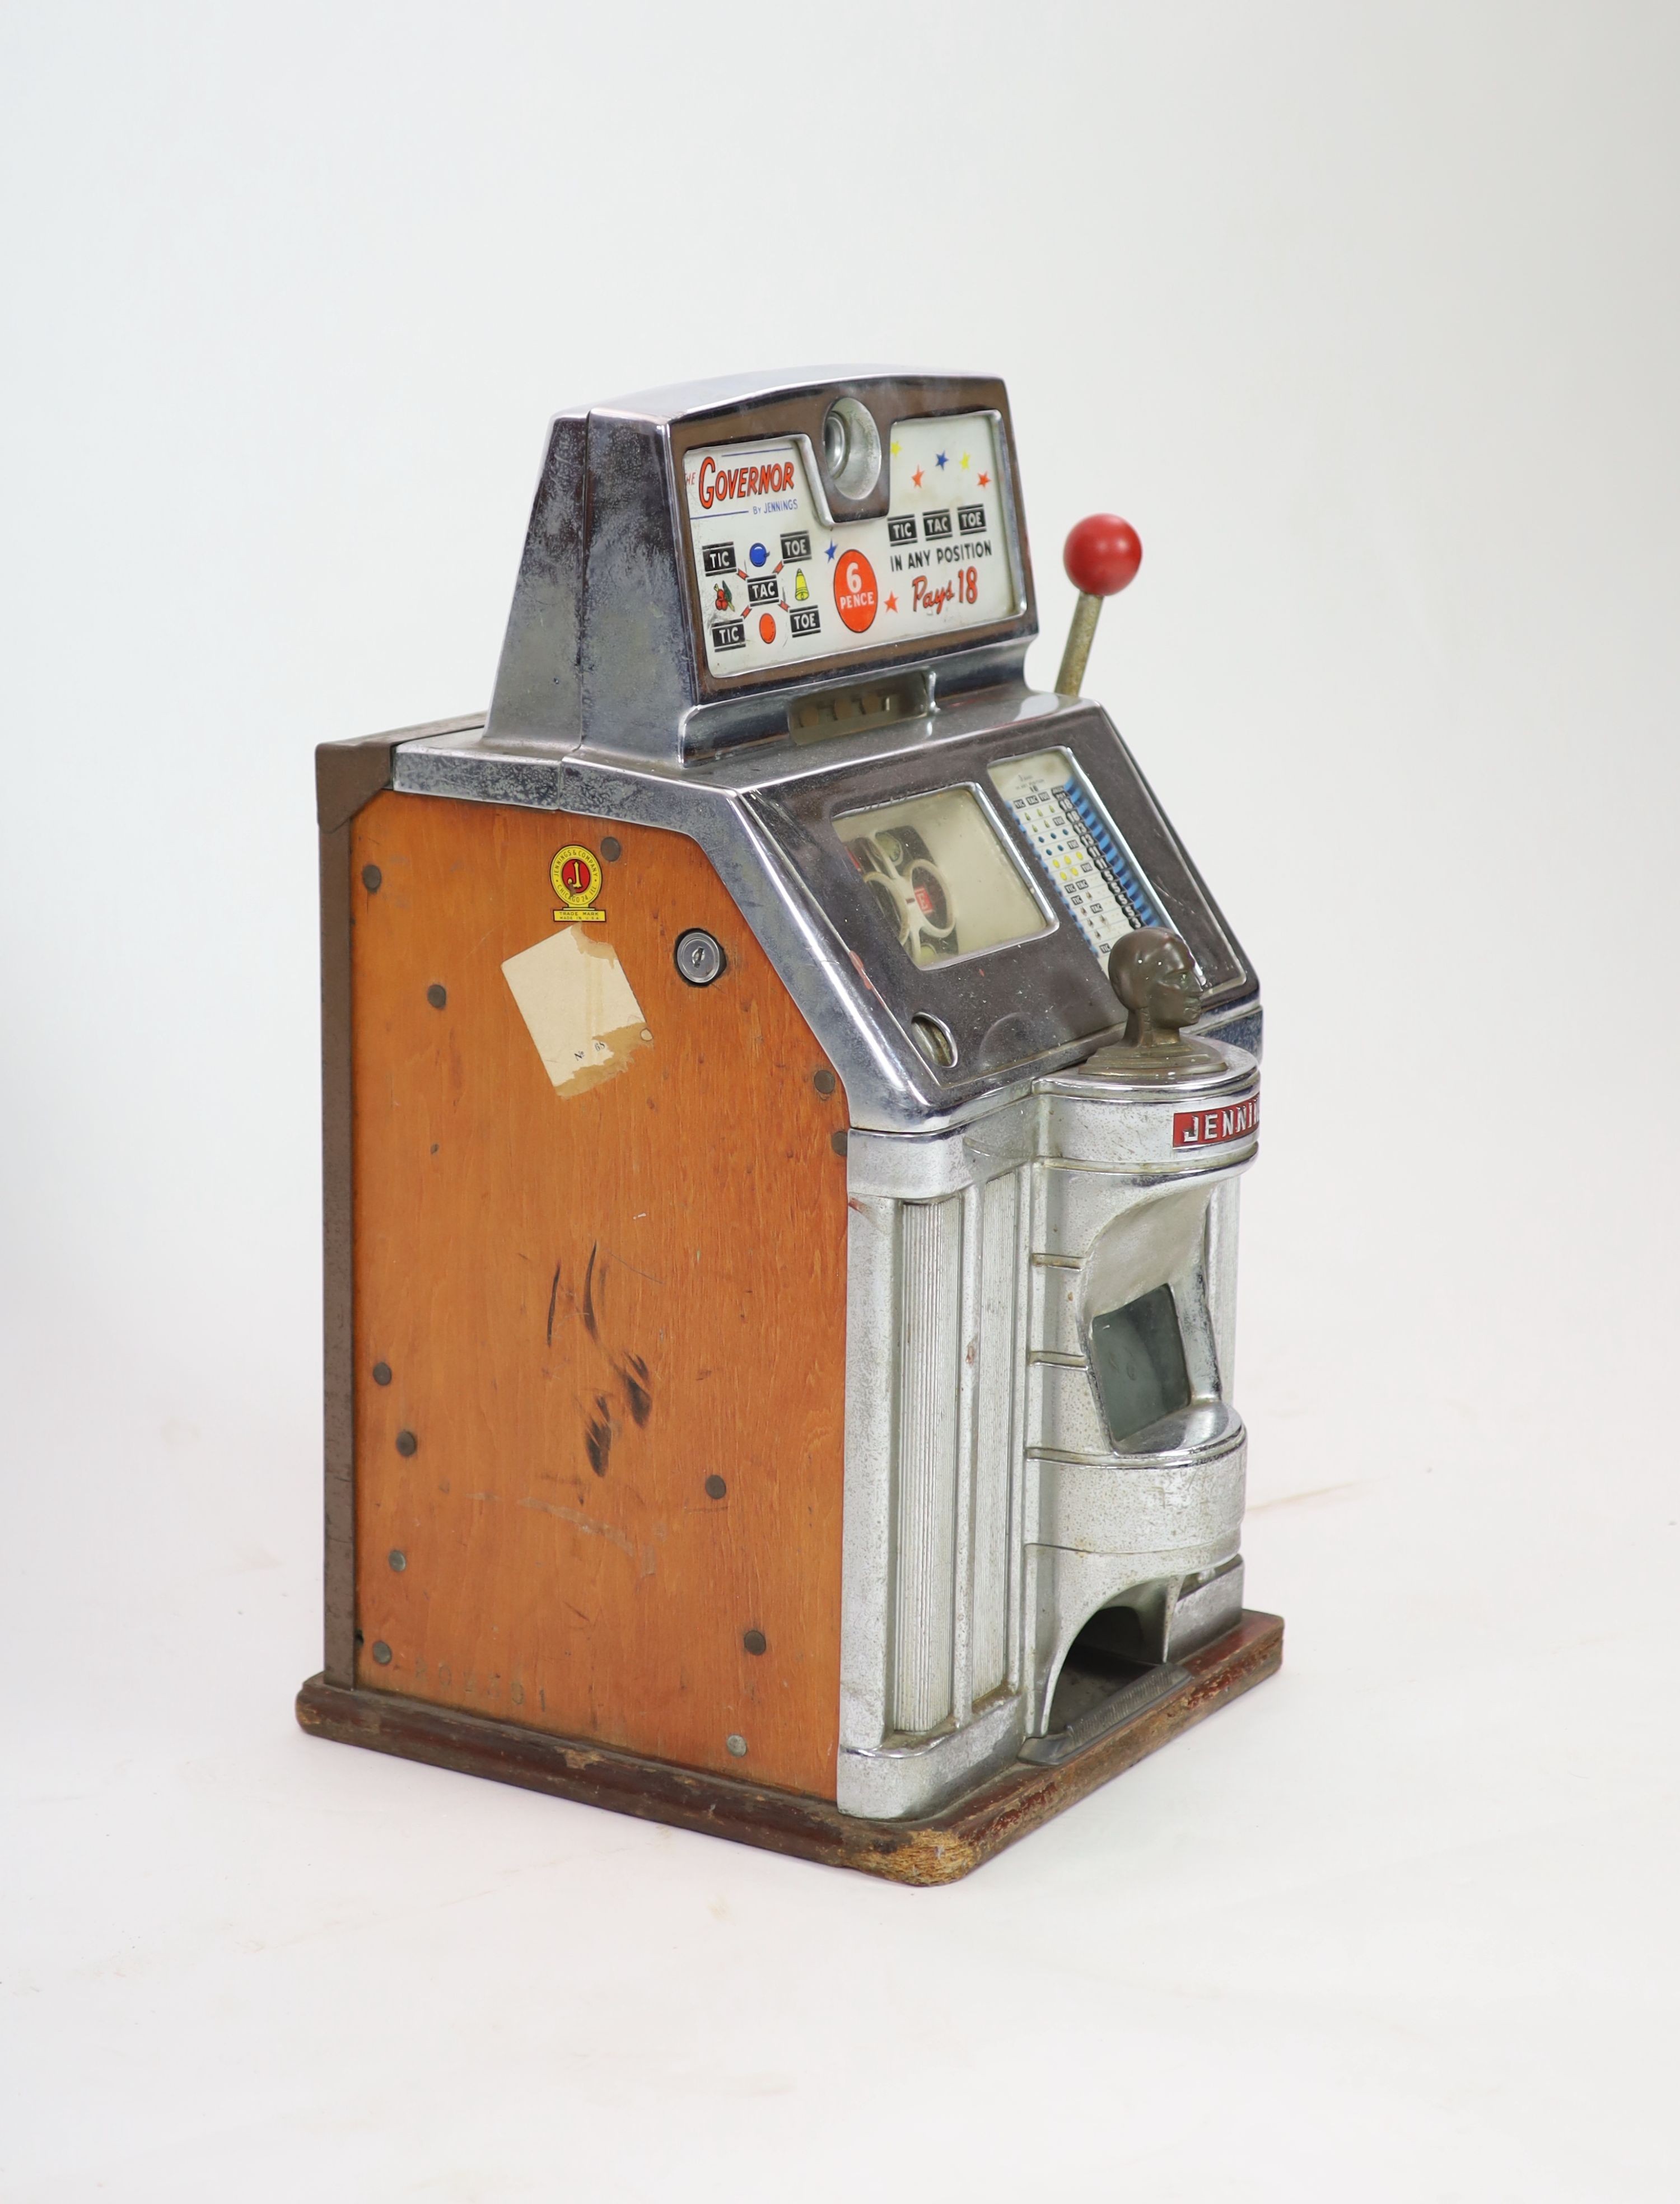 A Jennings 'The Governor' Tic Tac Toe penny slot machine, width 39cm depth 44cm height 69cm